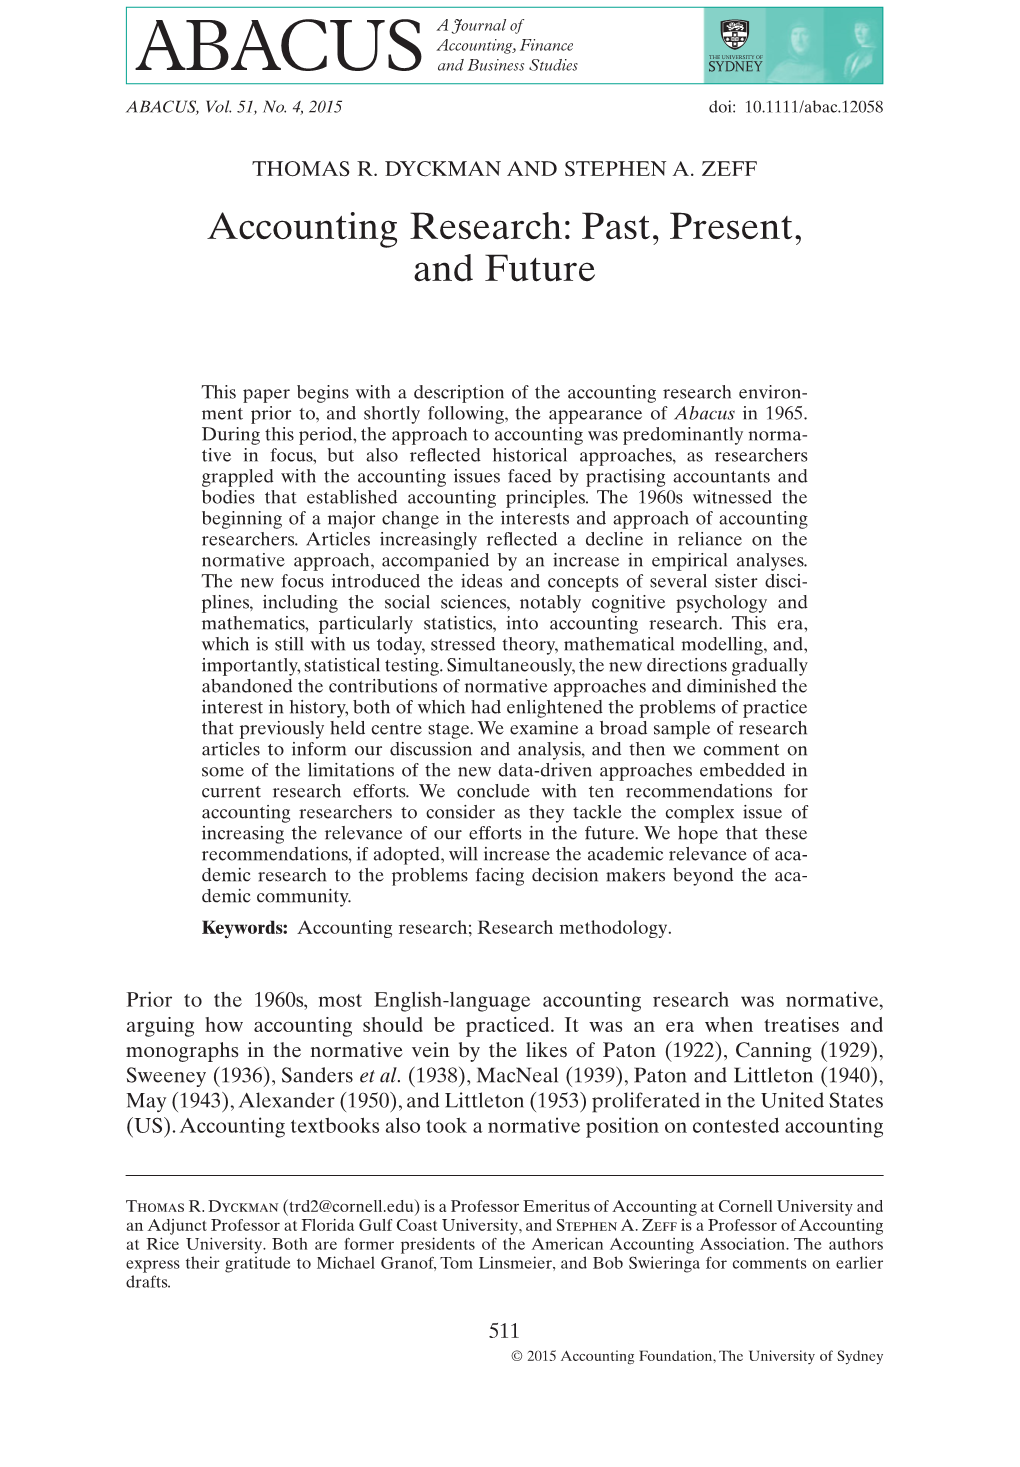 Accounting Research: Past, Present, and Future